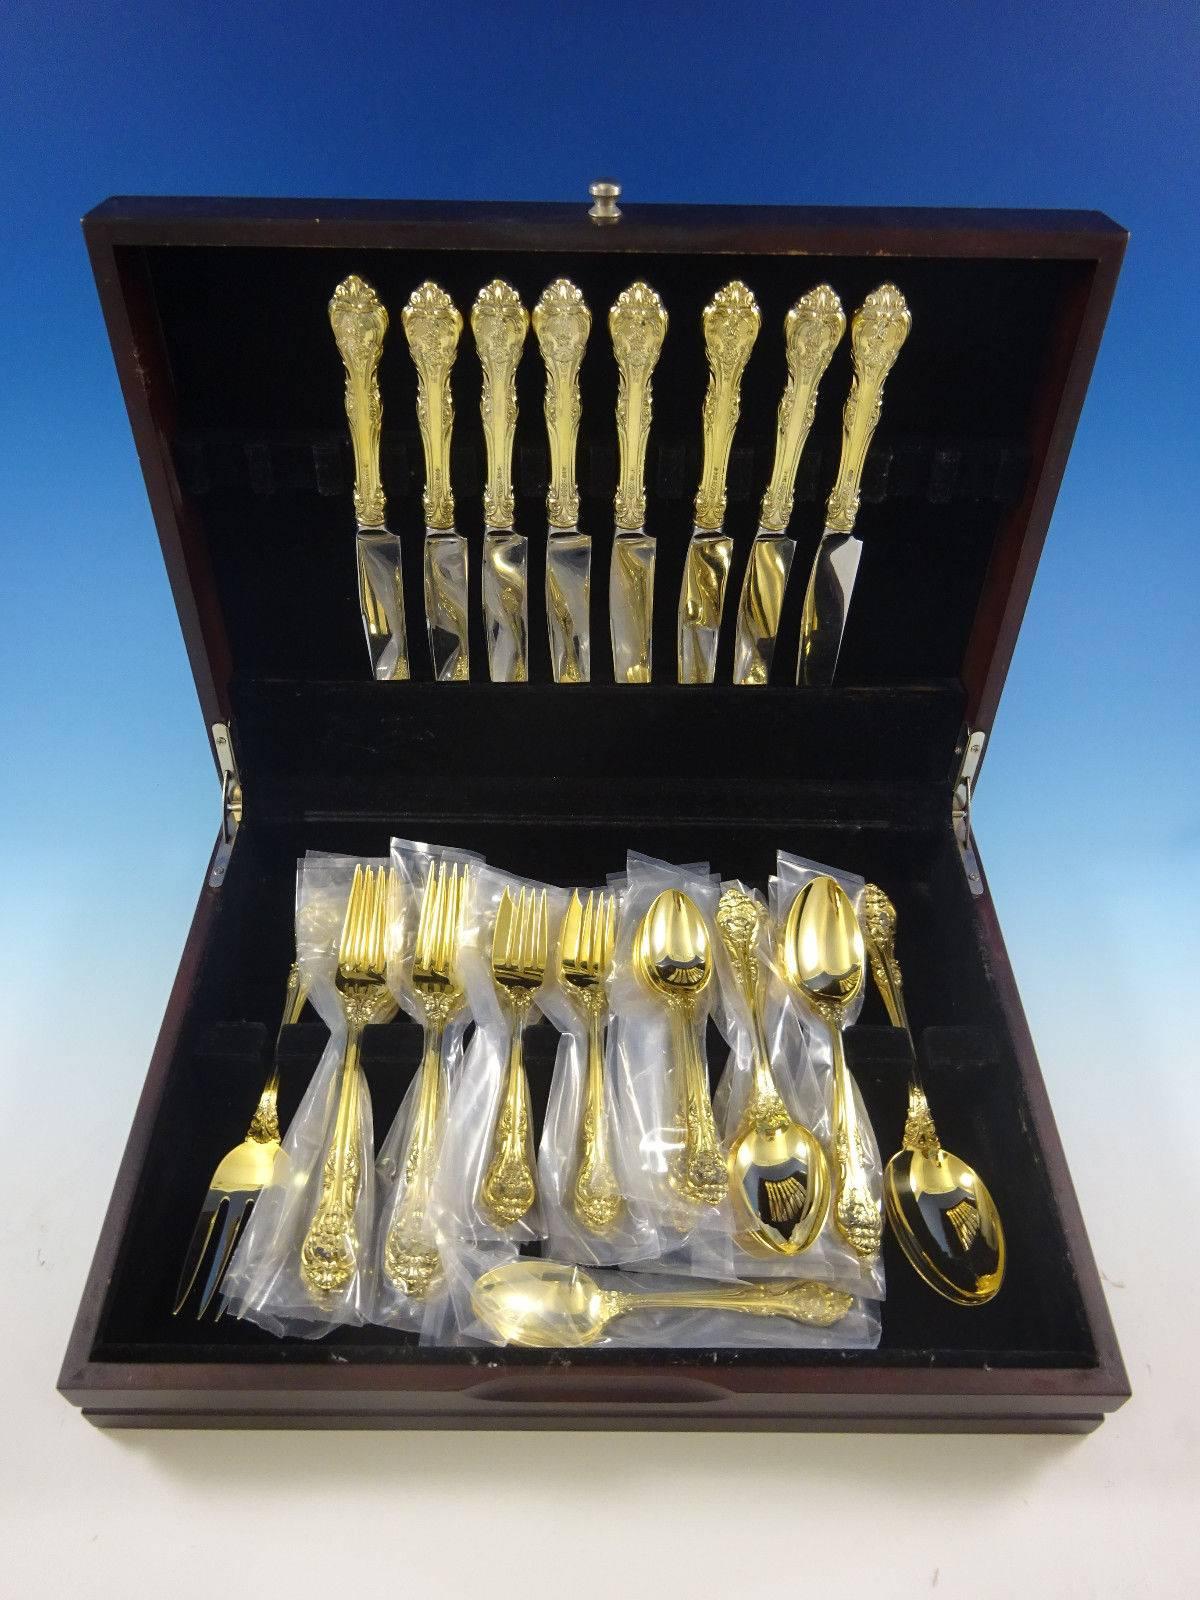 King Edward Gold by Gorham sterling silver Vermeil dinner size flatware set - 42 pieces. This set includes: 

Eight dinner size knives, 9 5/8